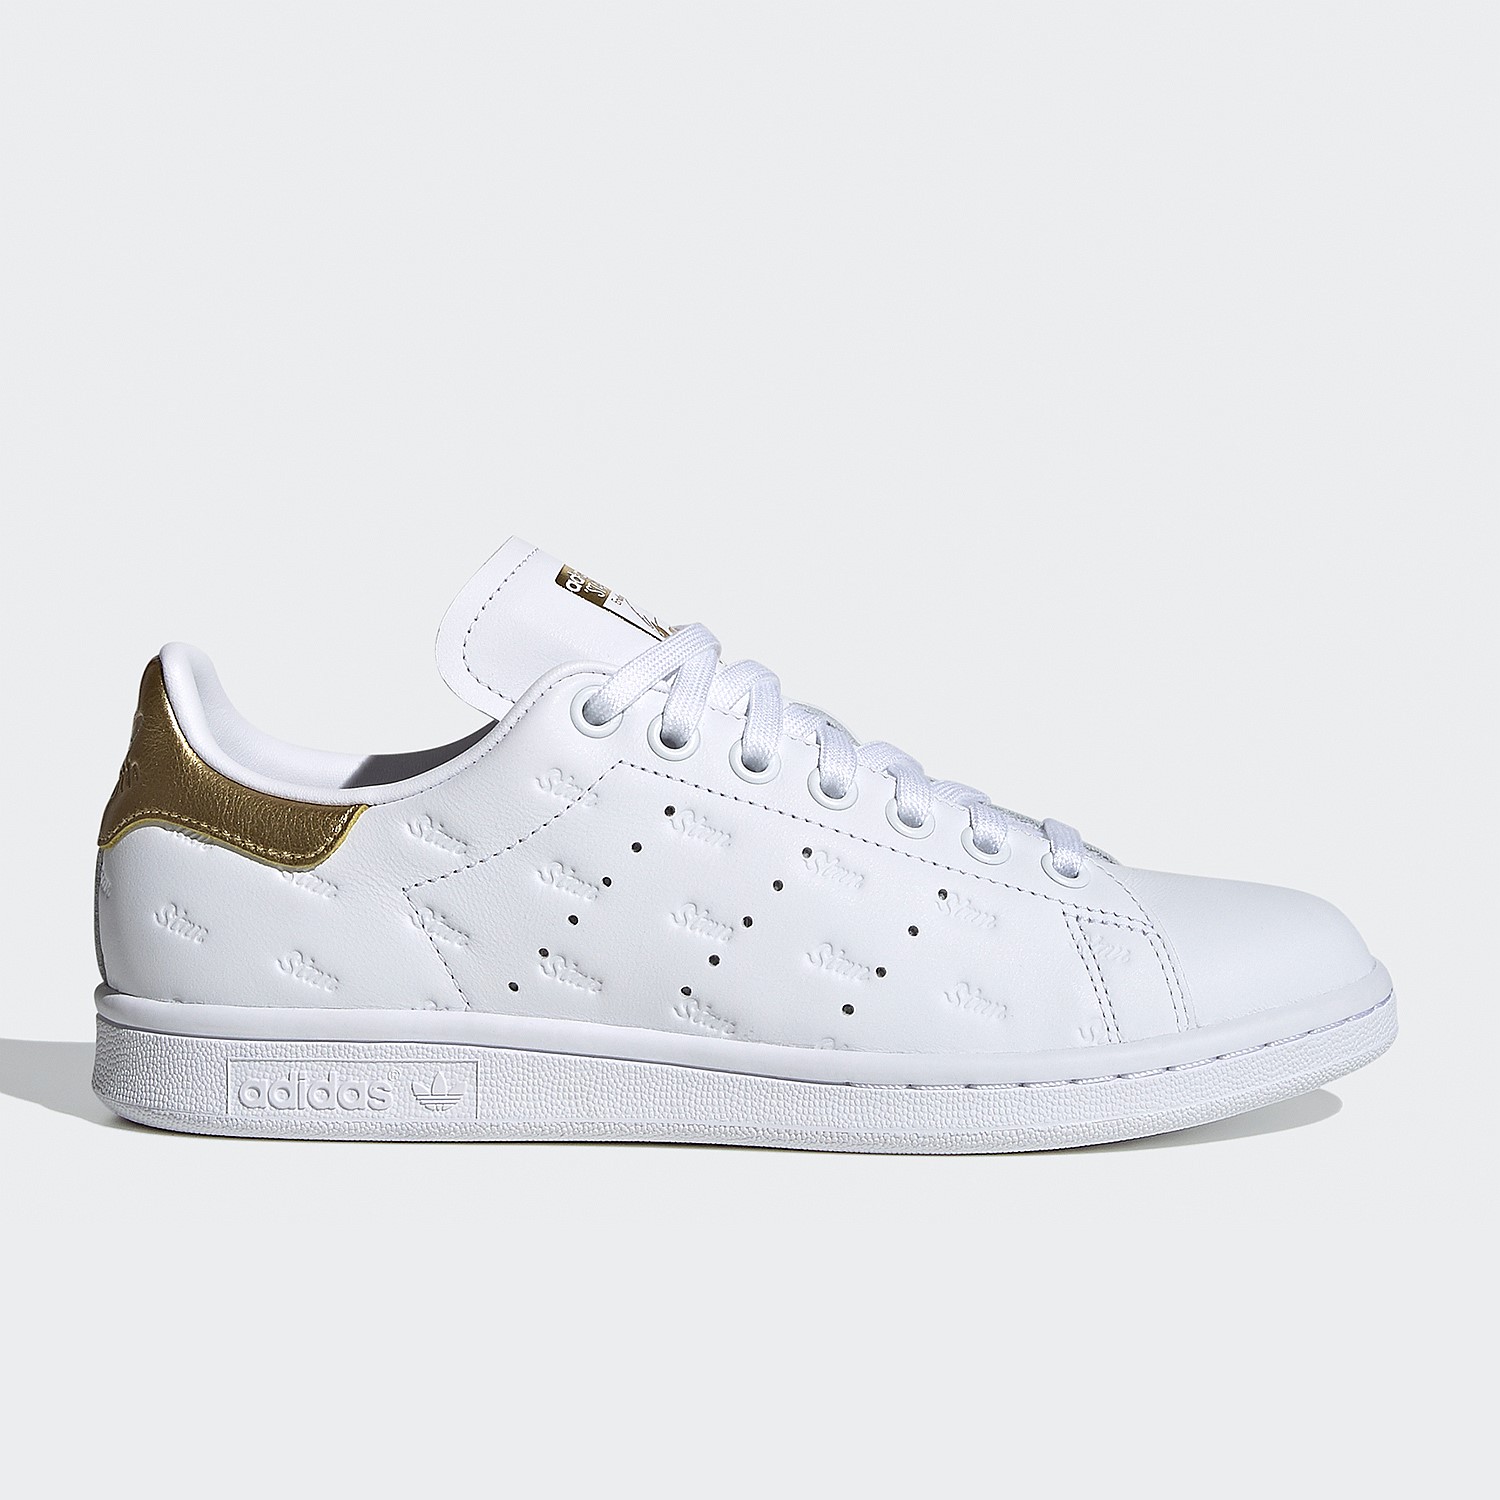 stan smith shoes black friday